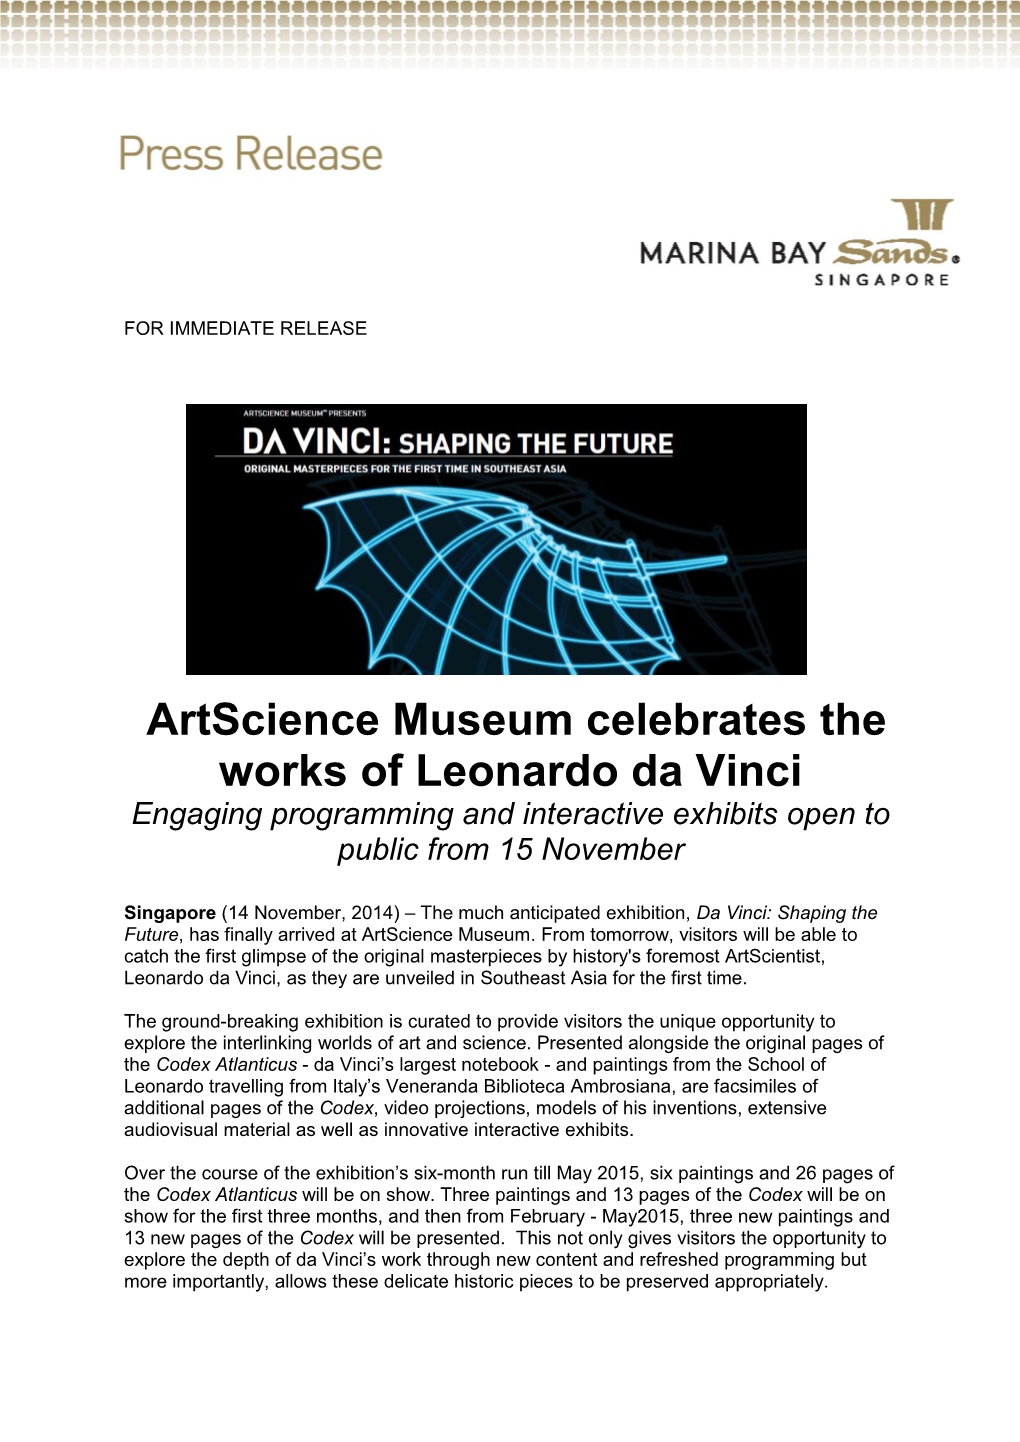 Artscience Museum Celebrates the Works of Leonardo Da Vinci Engaging Programming and Interactive Exhibits Open to Public from 15 November